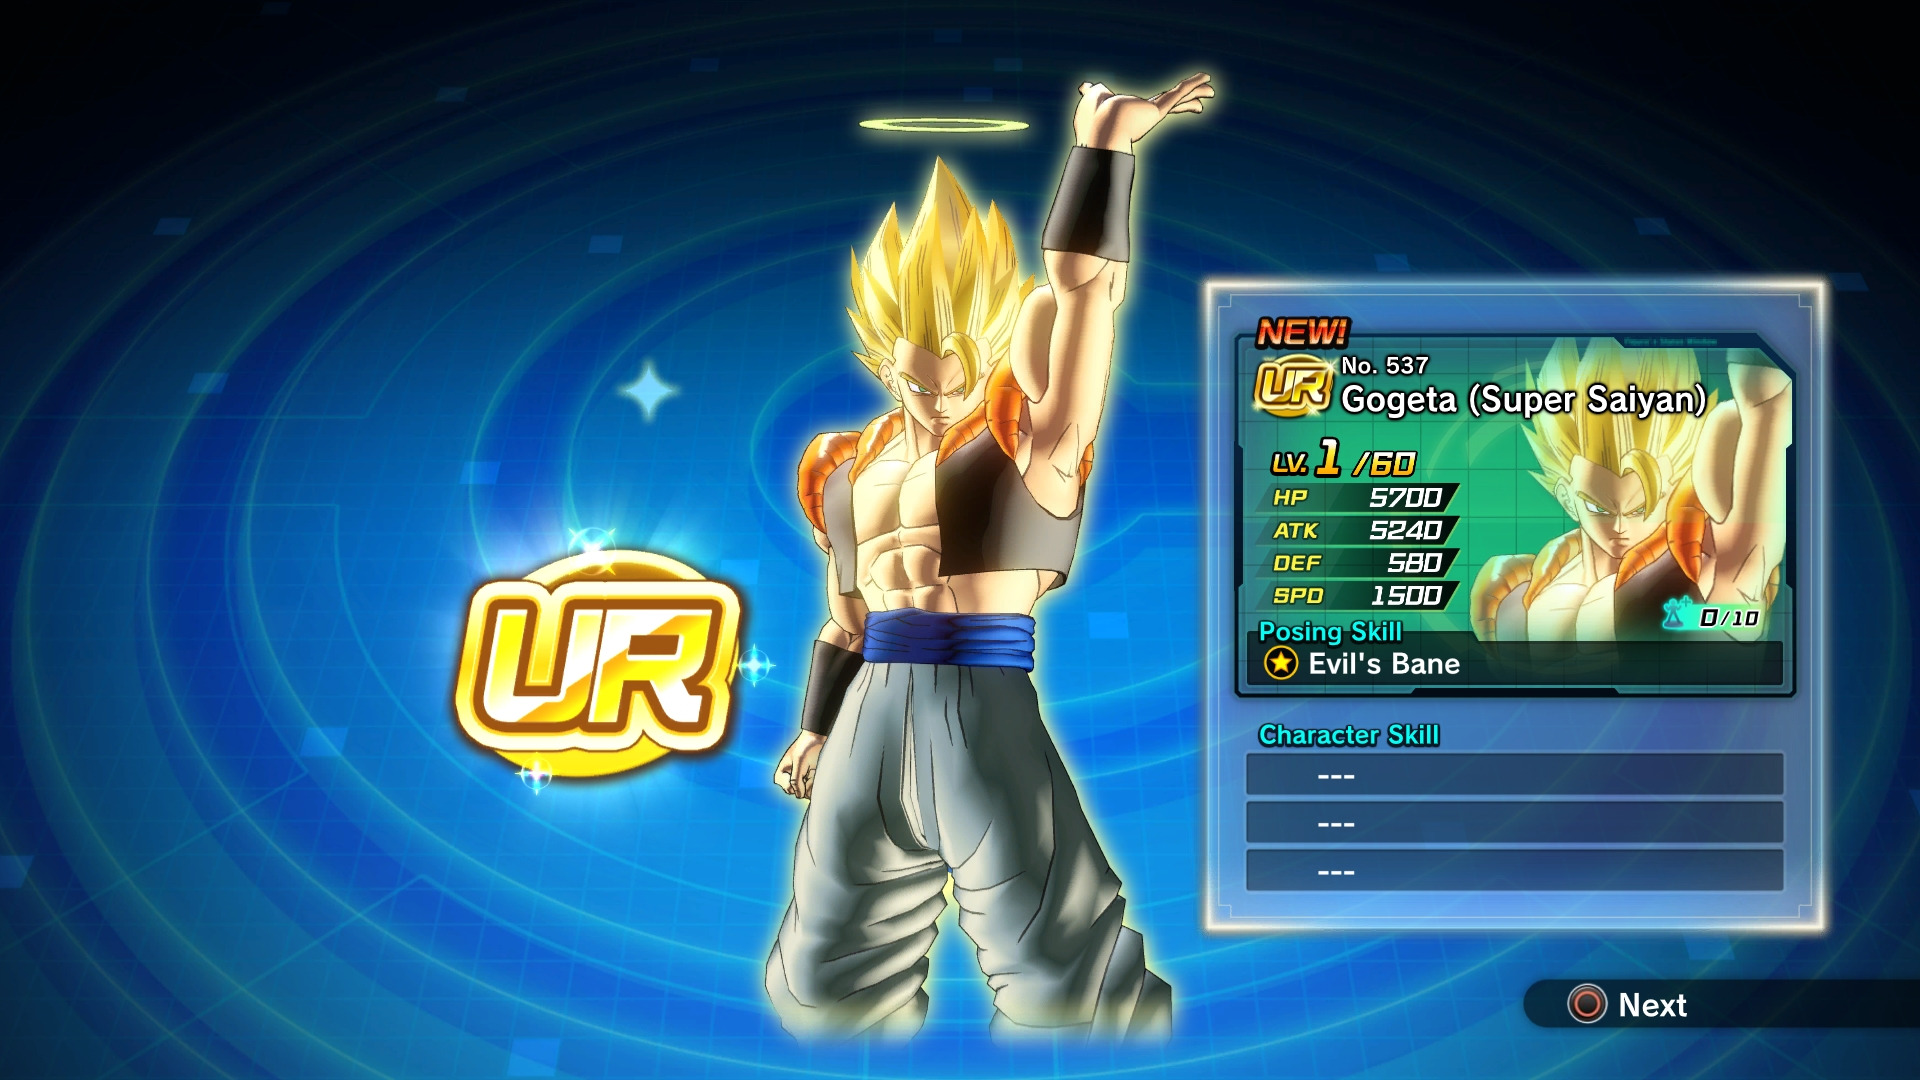 How to get legendary super saiyan in xenoverse 2